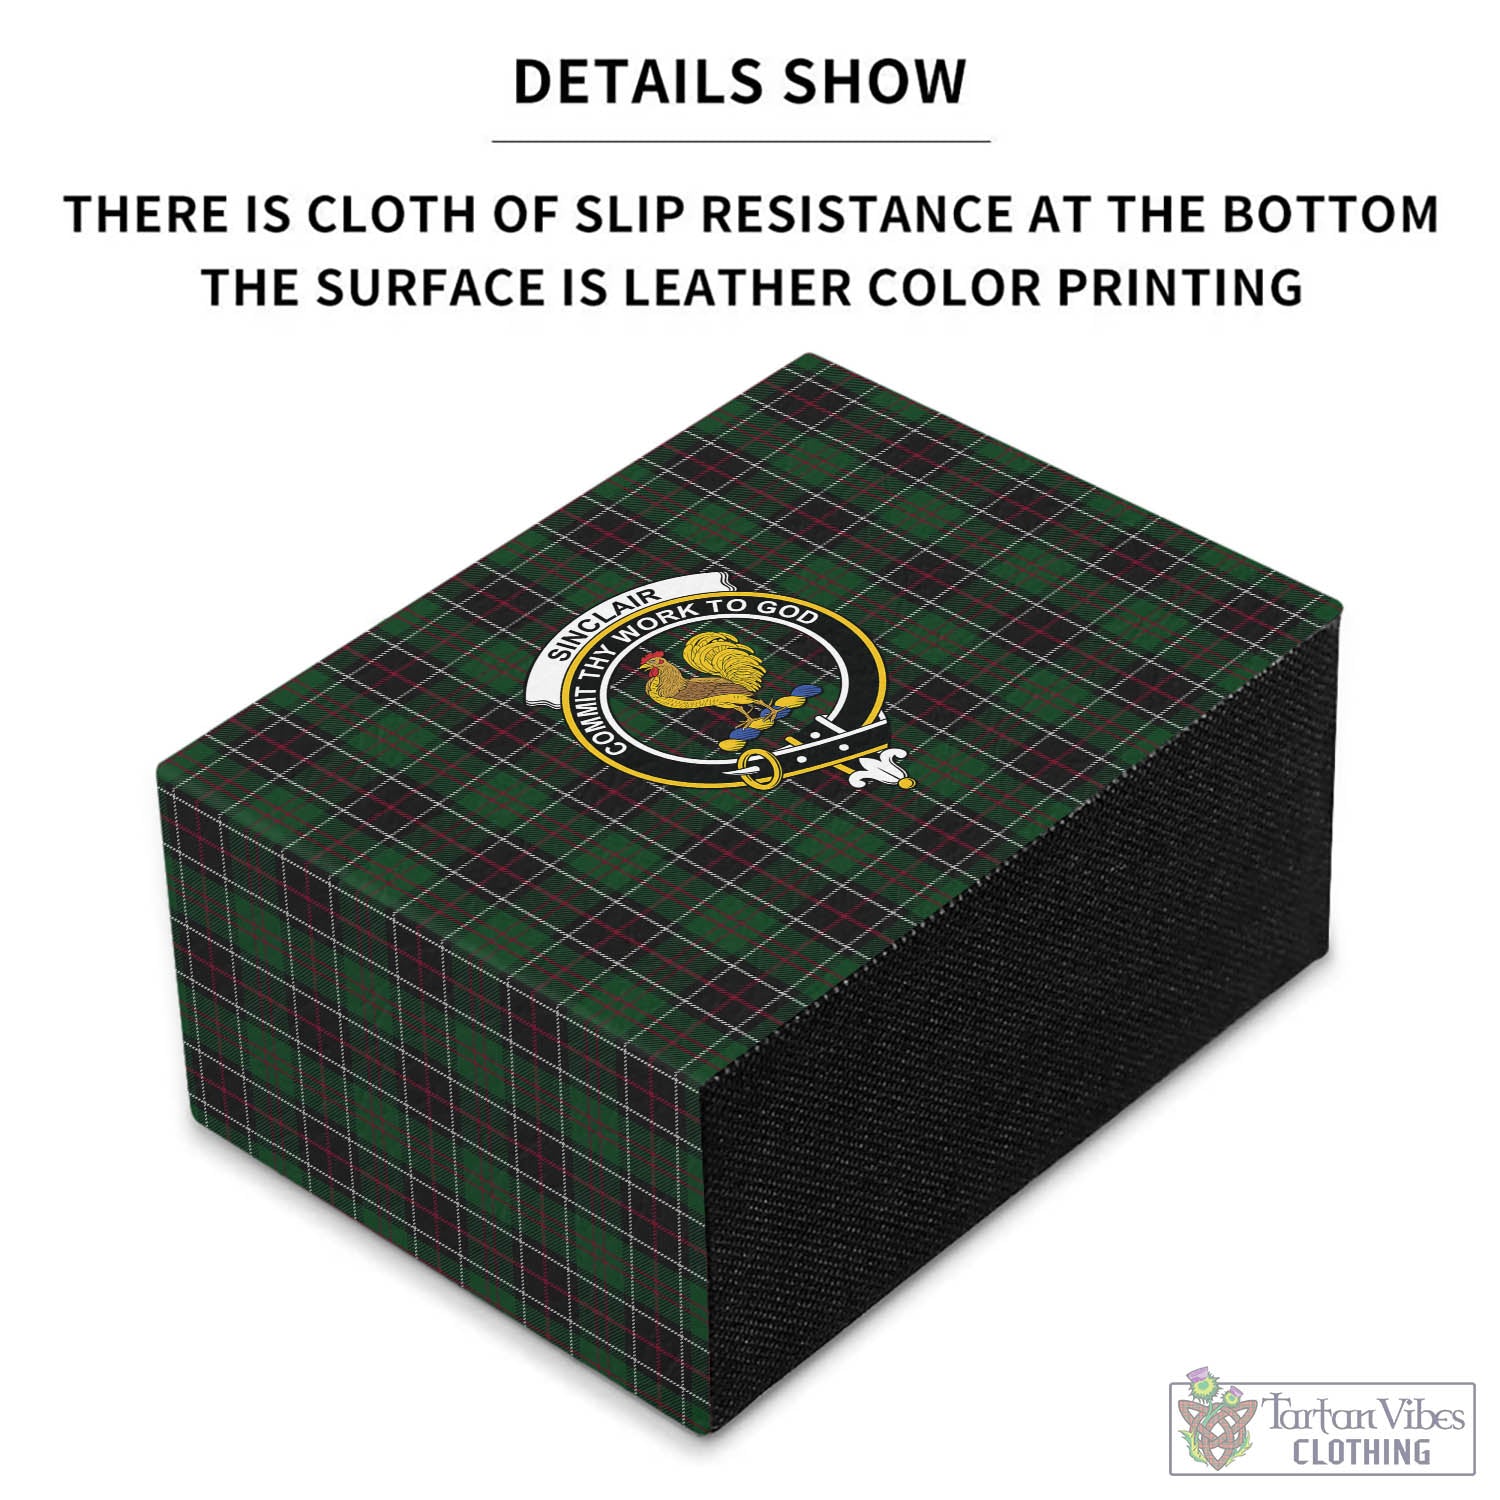 Tartan Vibes Clothing Sinclair Hunting Tartan Pen Holder with Family Crest